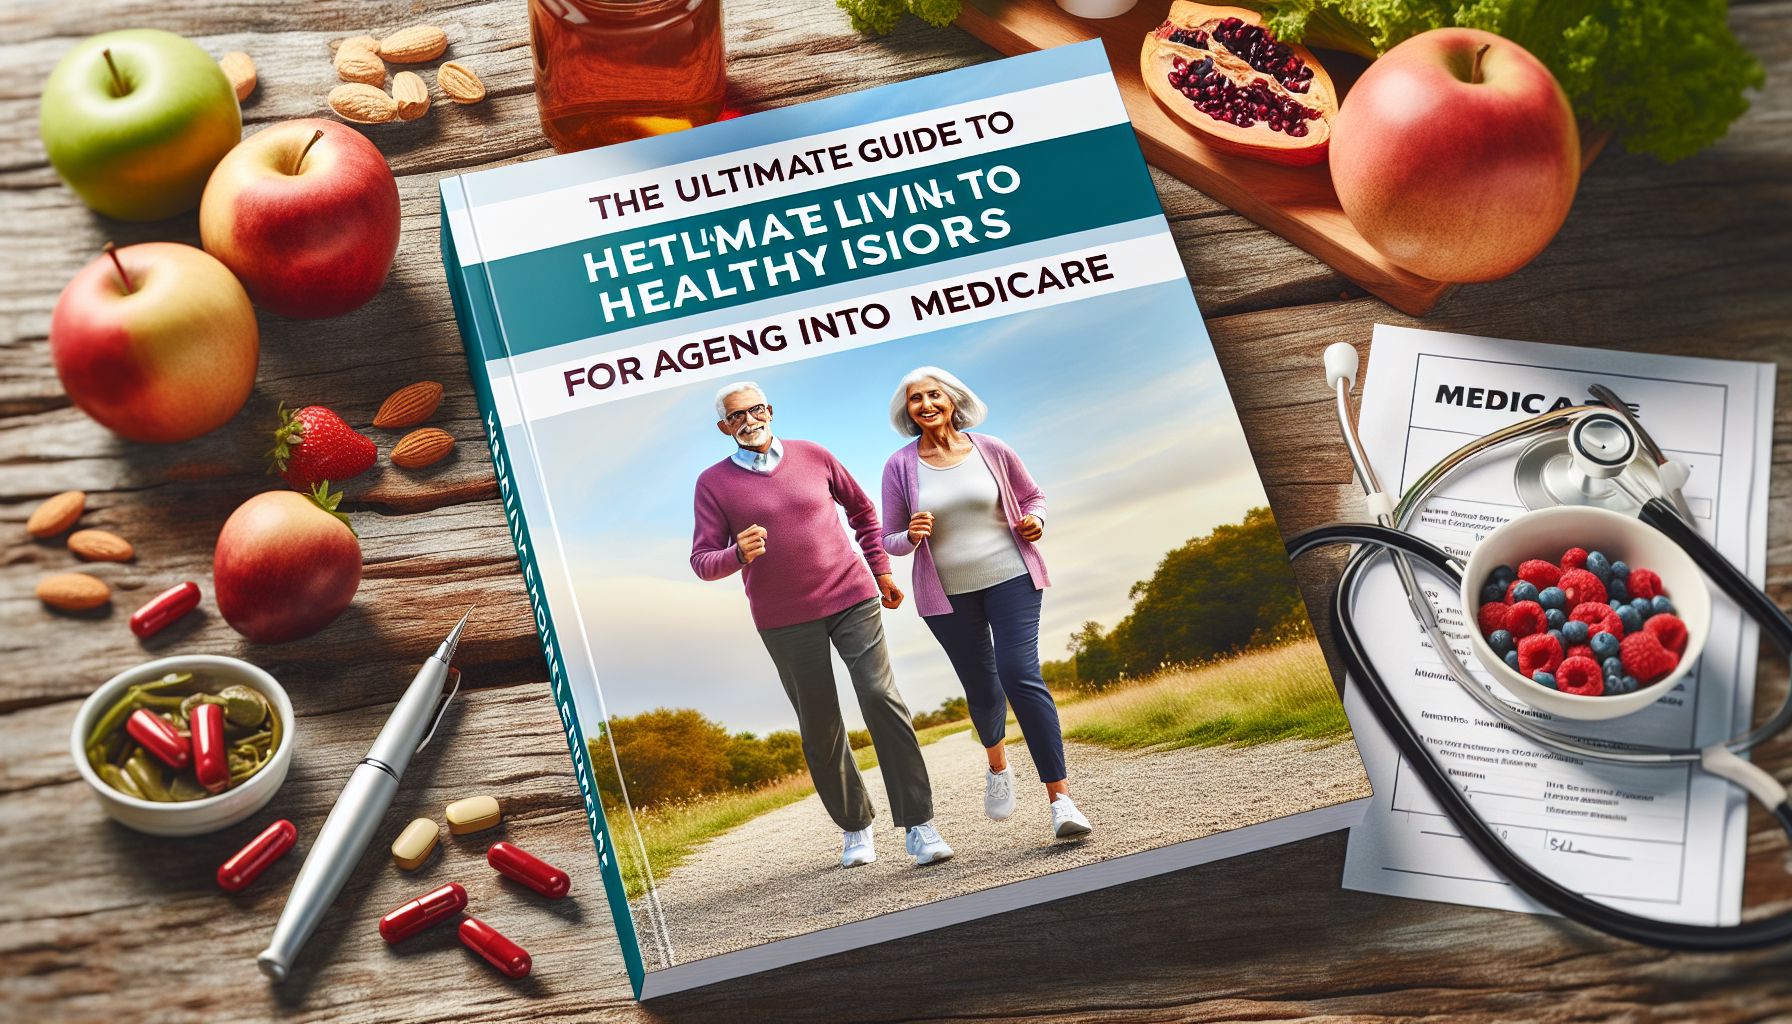 The Ultimate Guide to Healthy Living for Seniors Ageing into Medicare